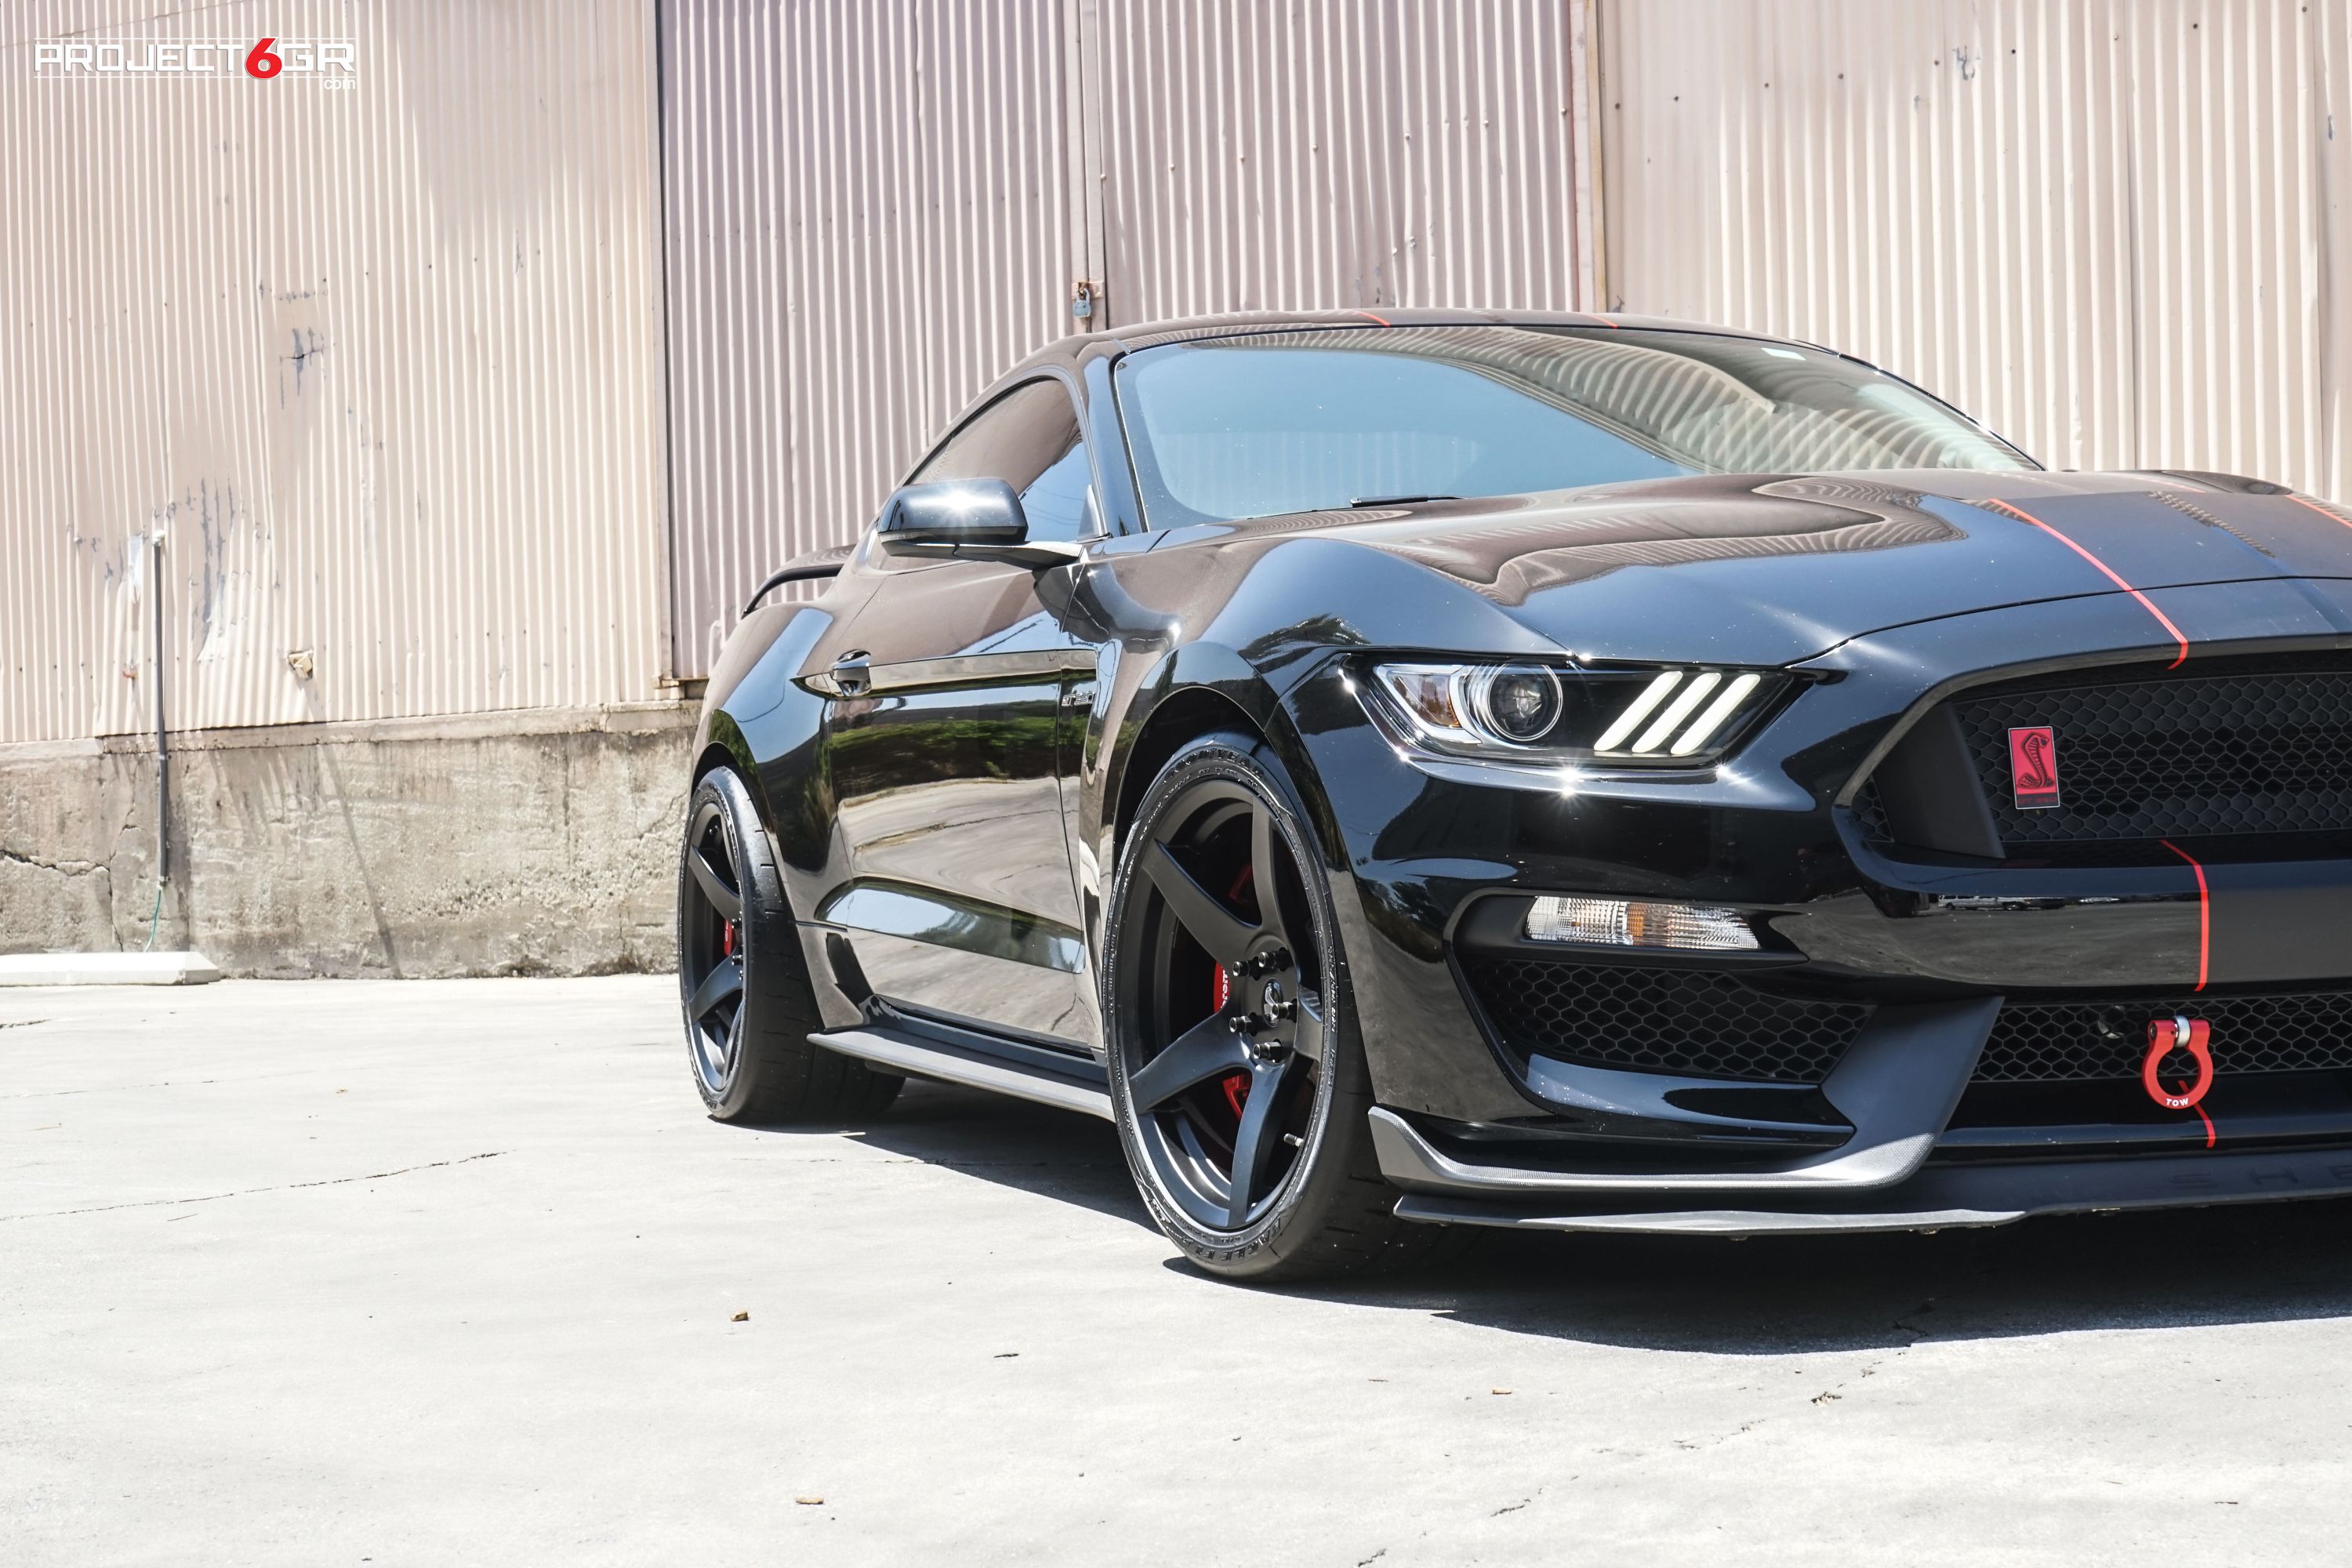 project-6gr-5-five-19x11-squared-setup-shelby-gt350r-eagle-f1-03.jpg